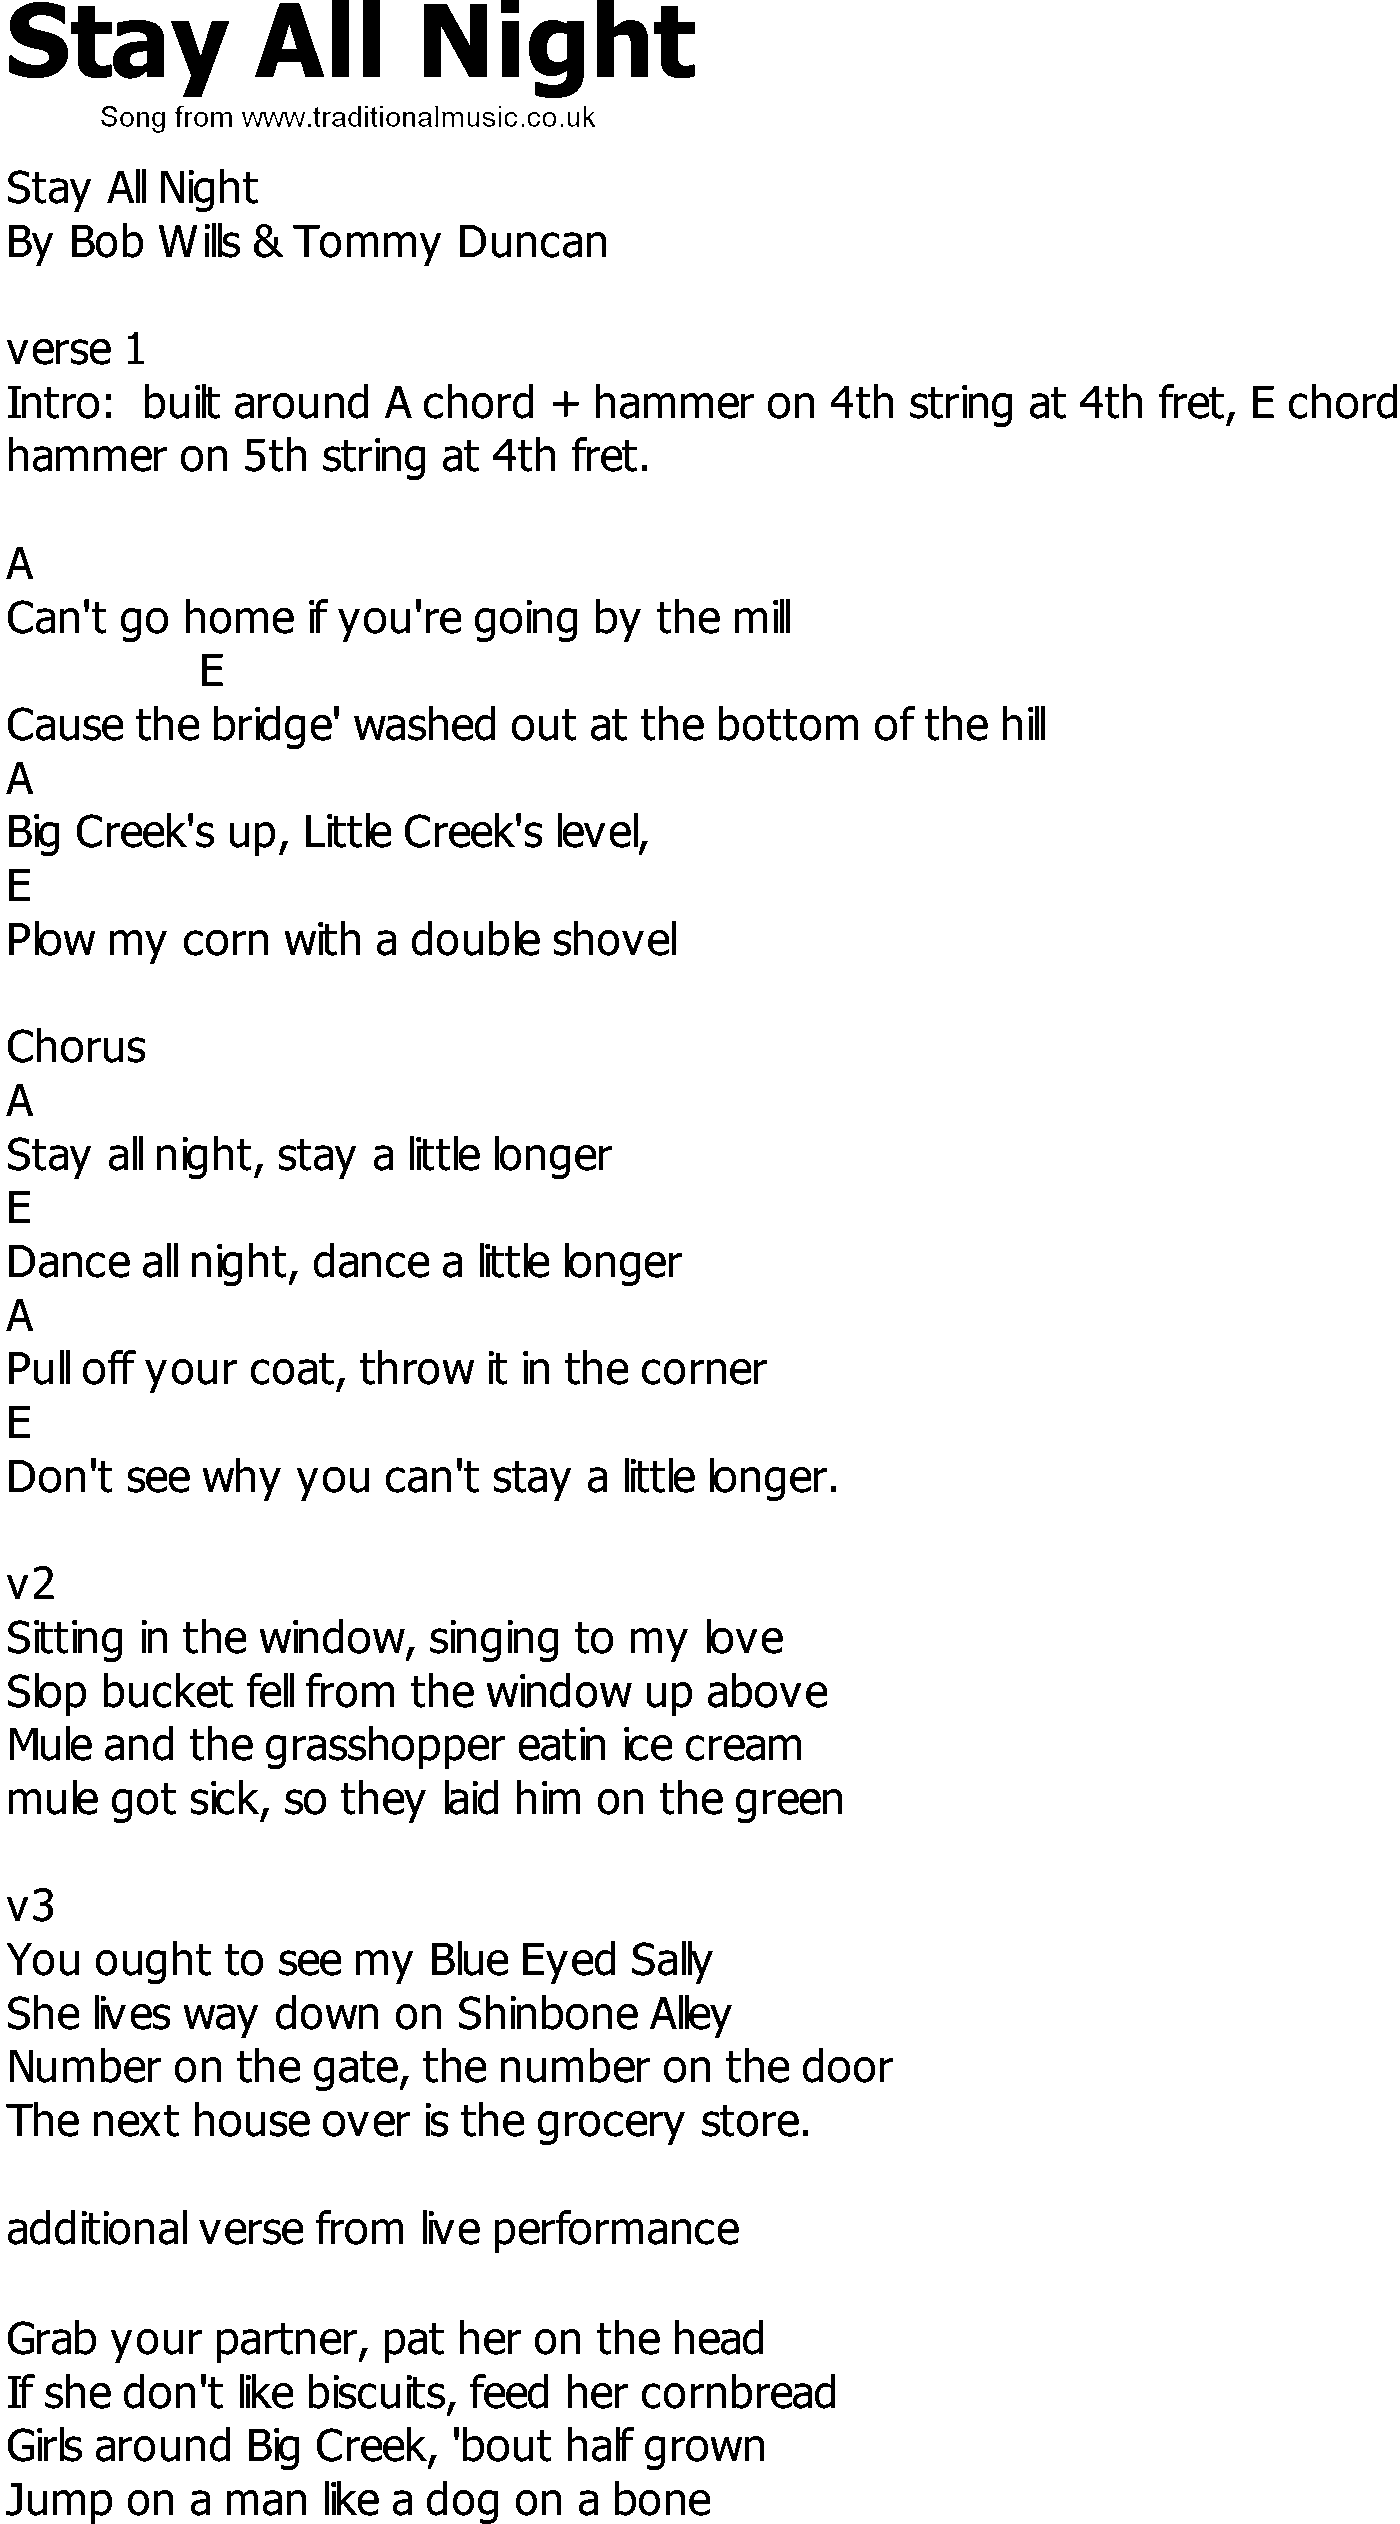 Old Country song lyrics with chords - Stay All Night